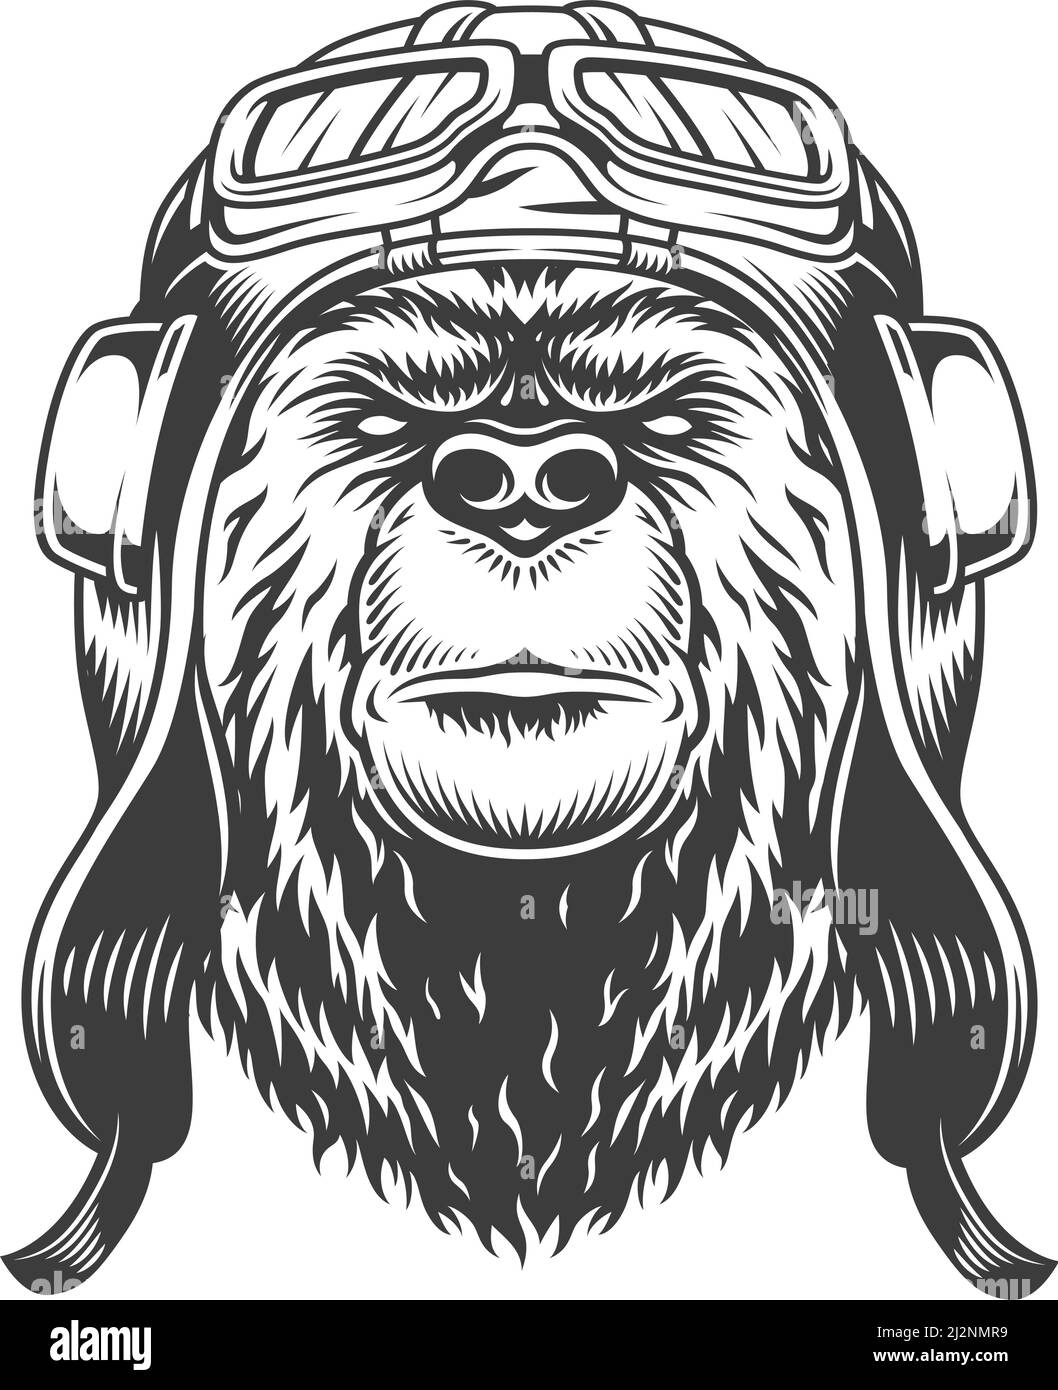 Bear head in helmet and goggles in vintage monochrome style isolated vector illustration Stock Vector